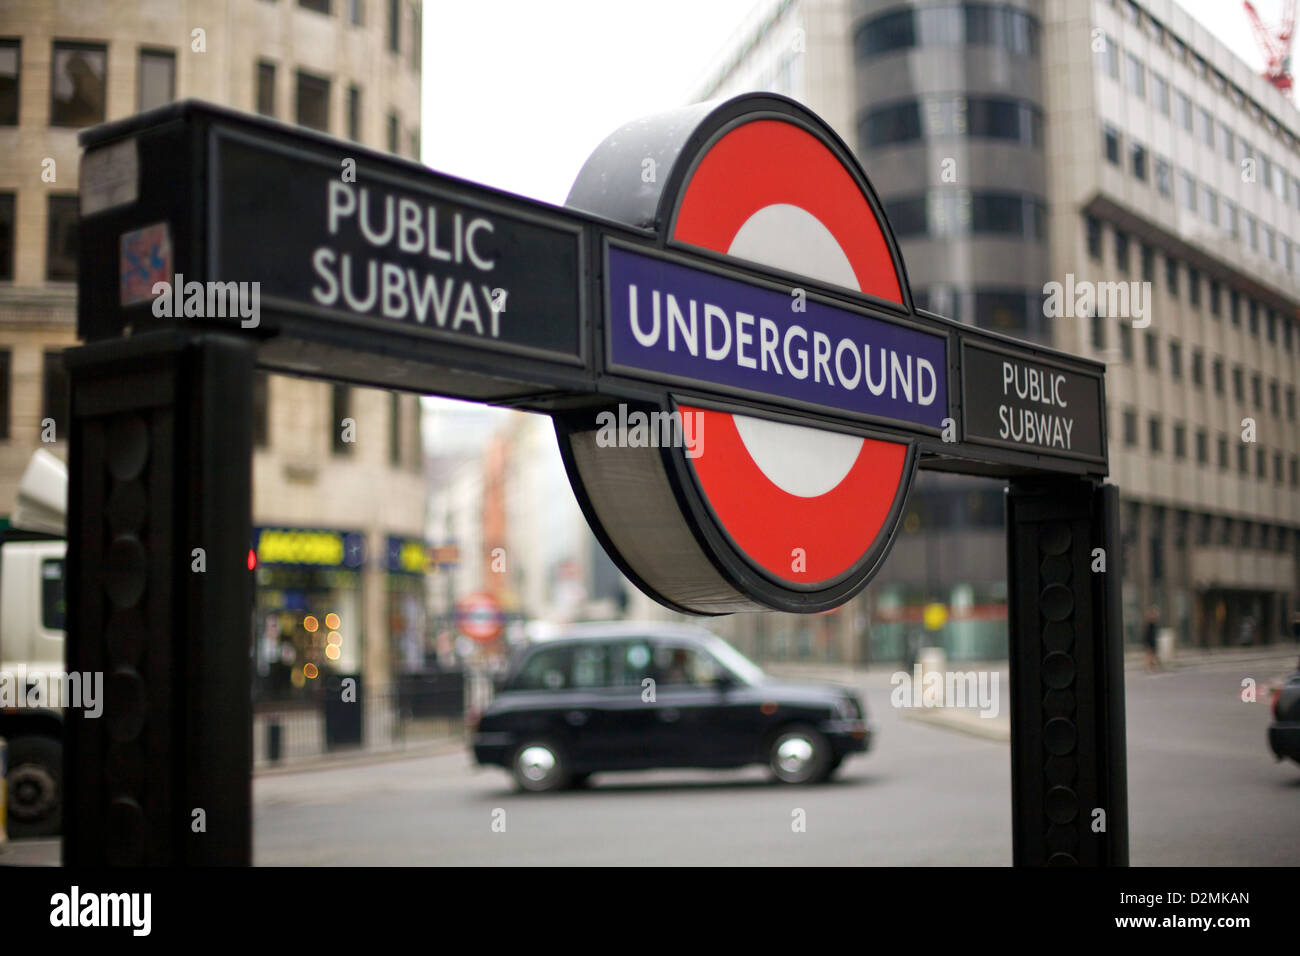 A black London cab passes behind an Underground sign in London, England Stock Photo